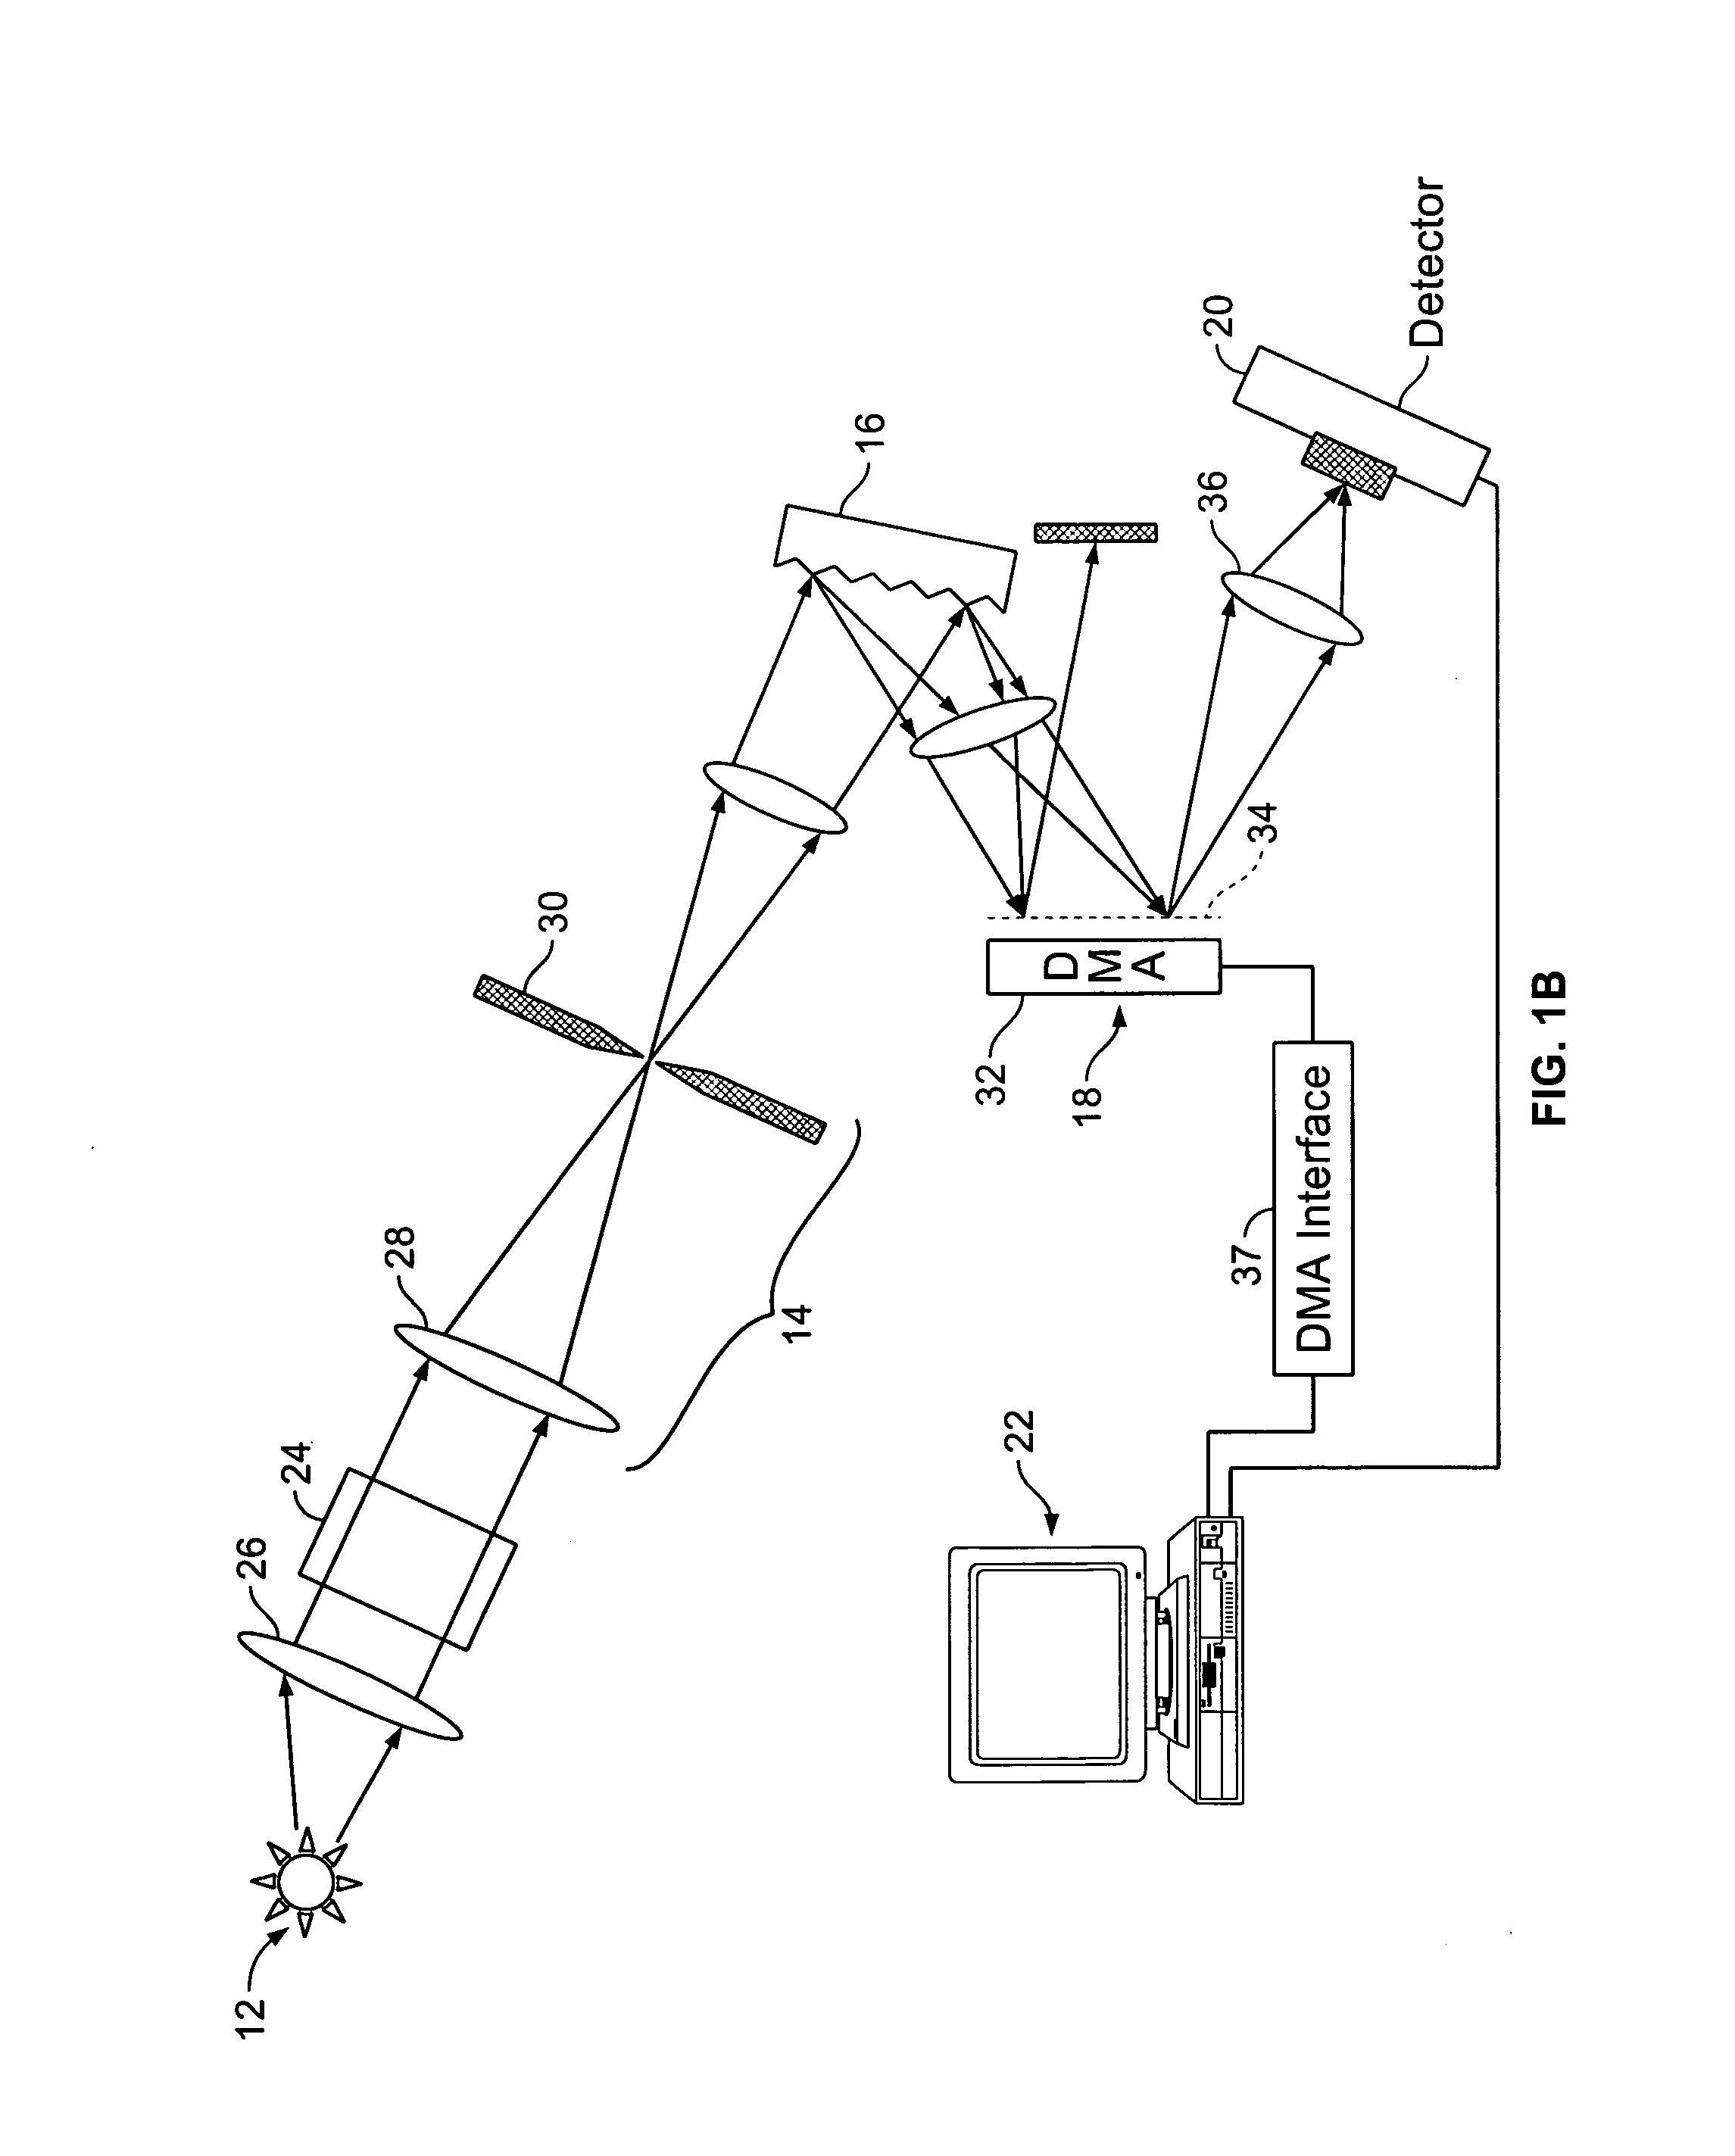 System and method for hyper-spectral analysis